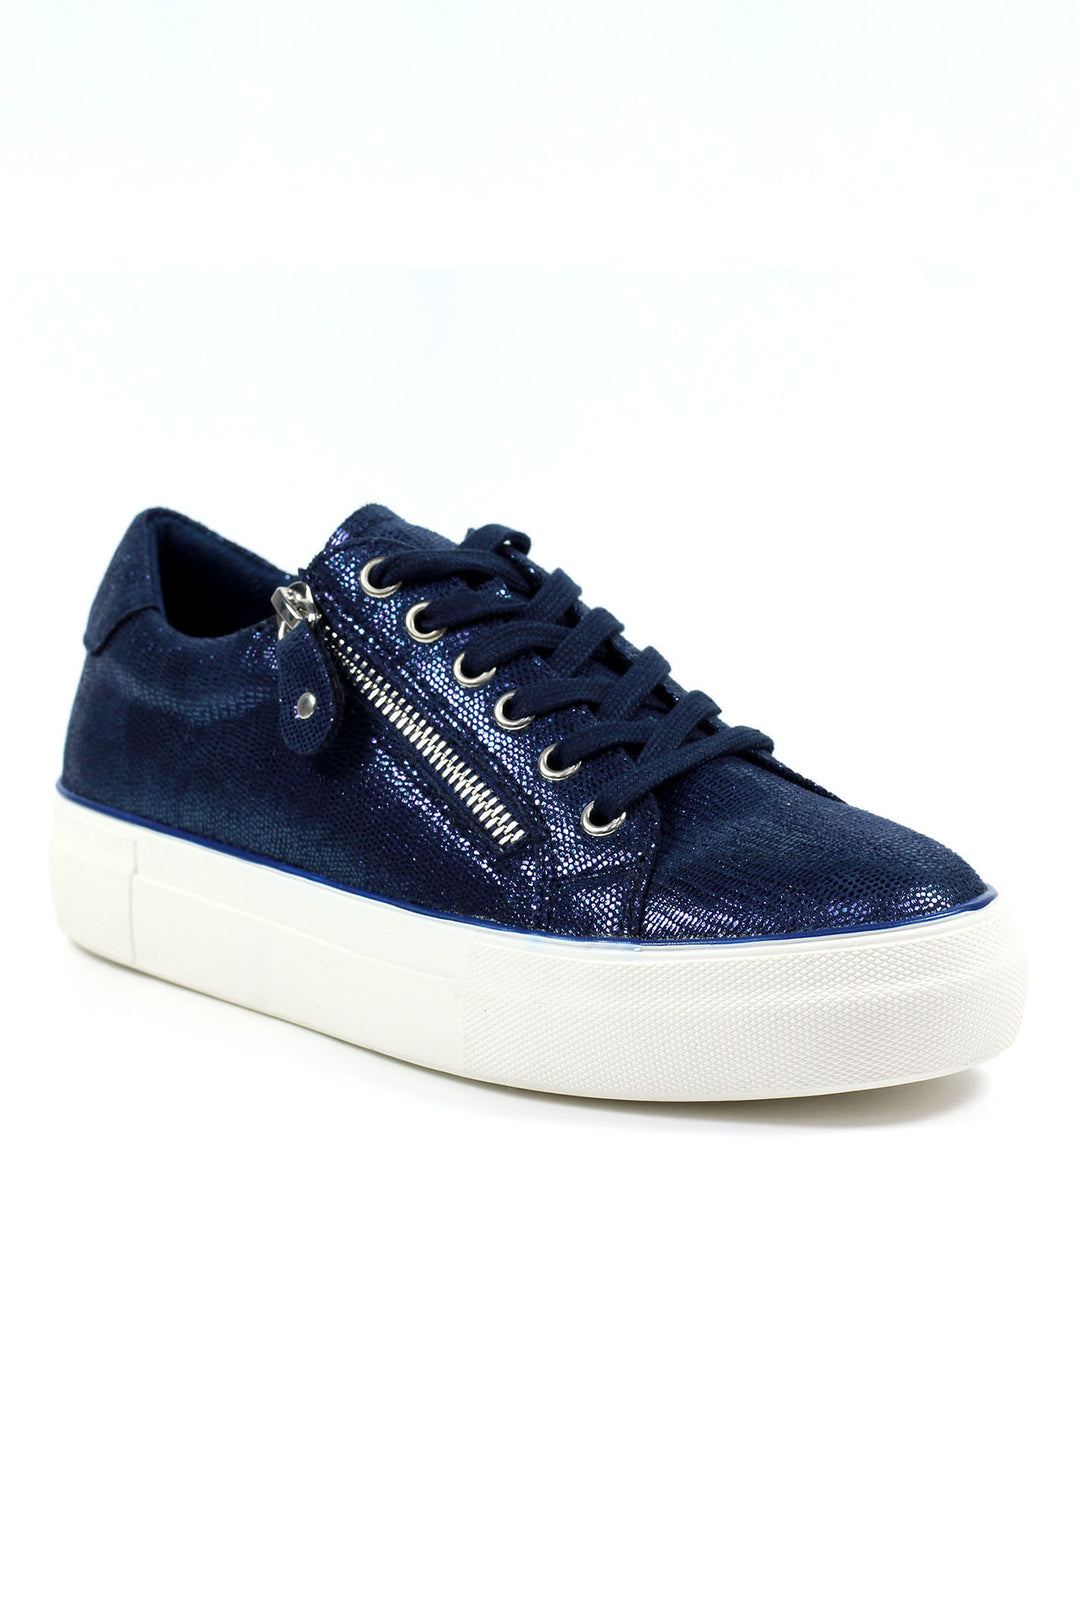 Lunar DLB034 Blue Shimmer Trainers - Experience Boutique